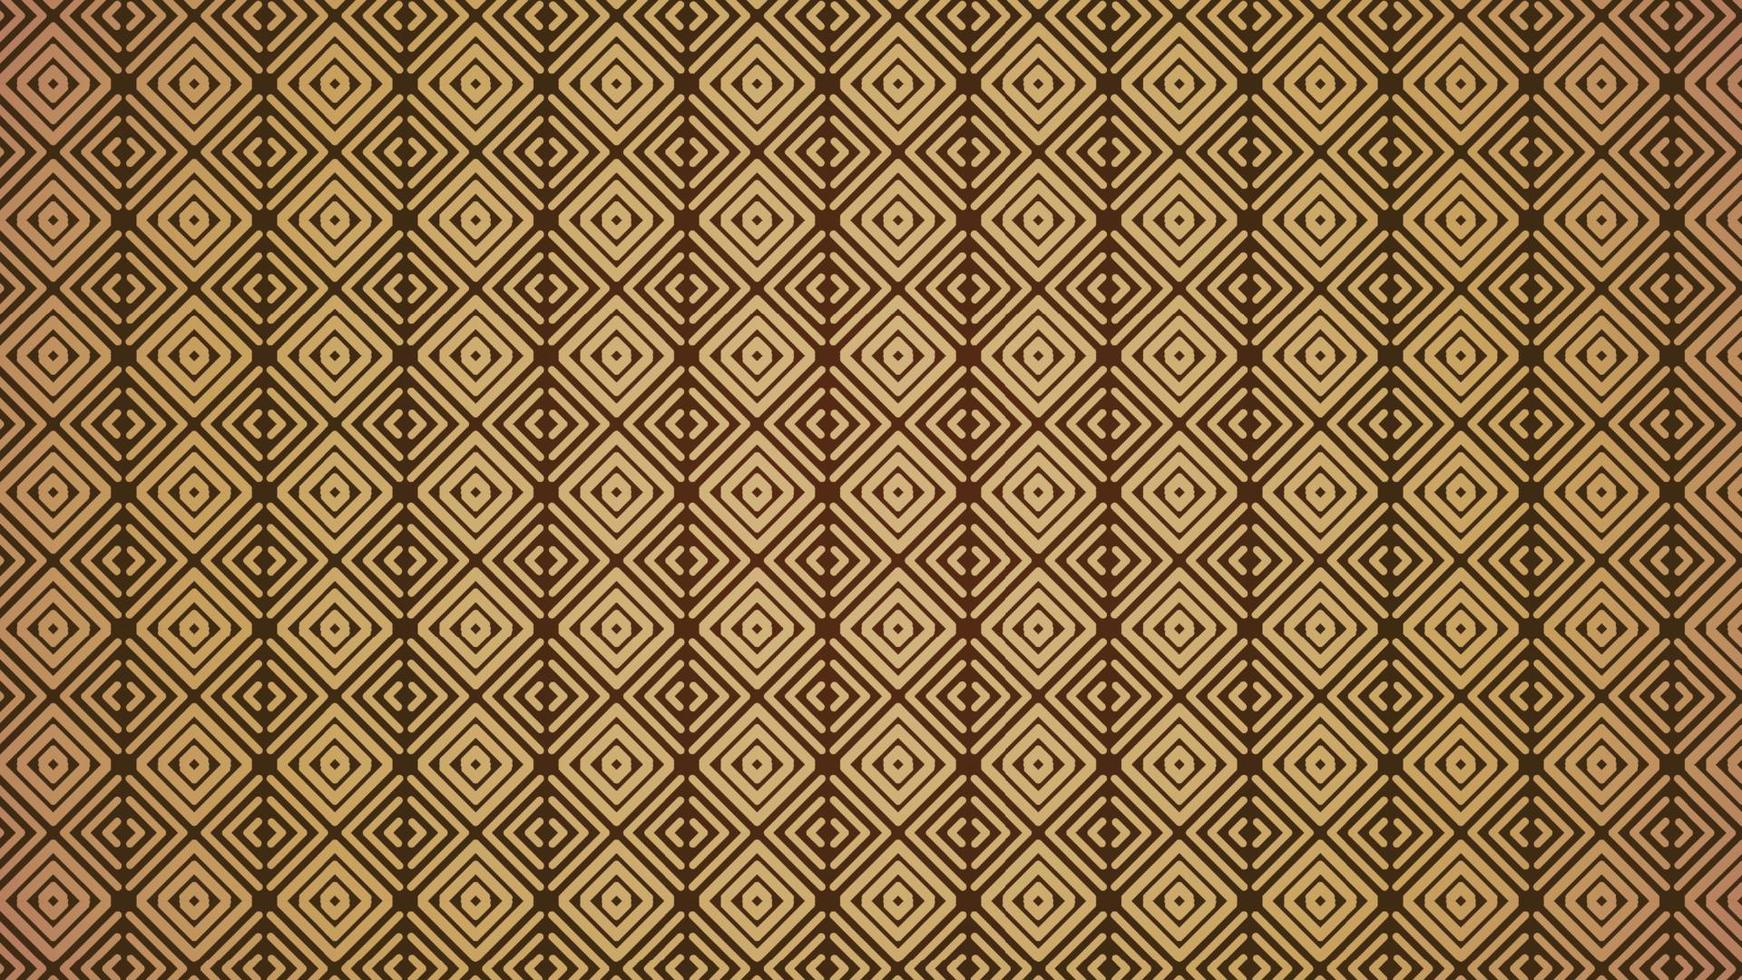 abstract geometric patterns in brown vector